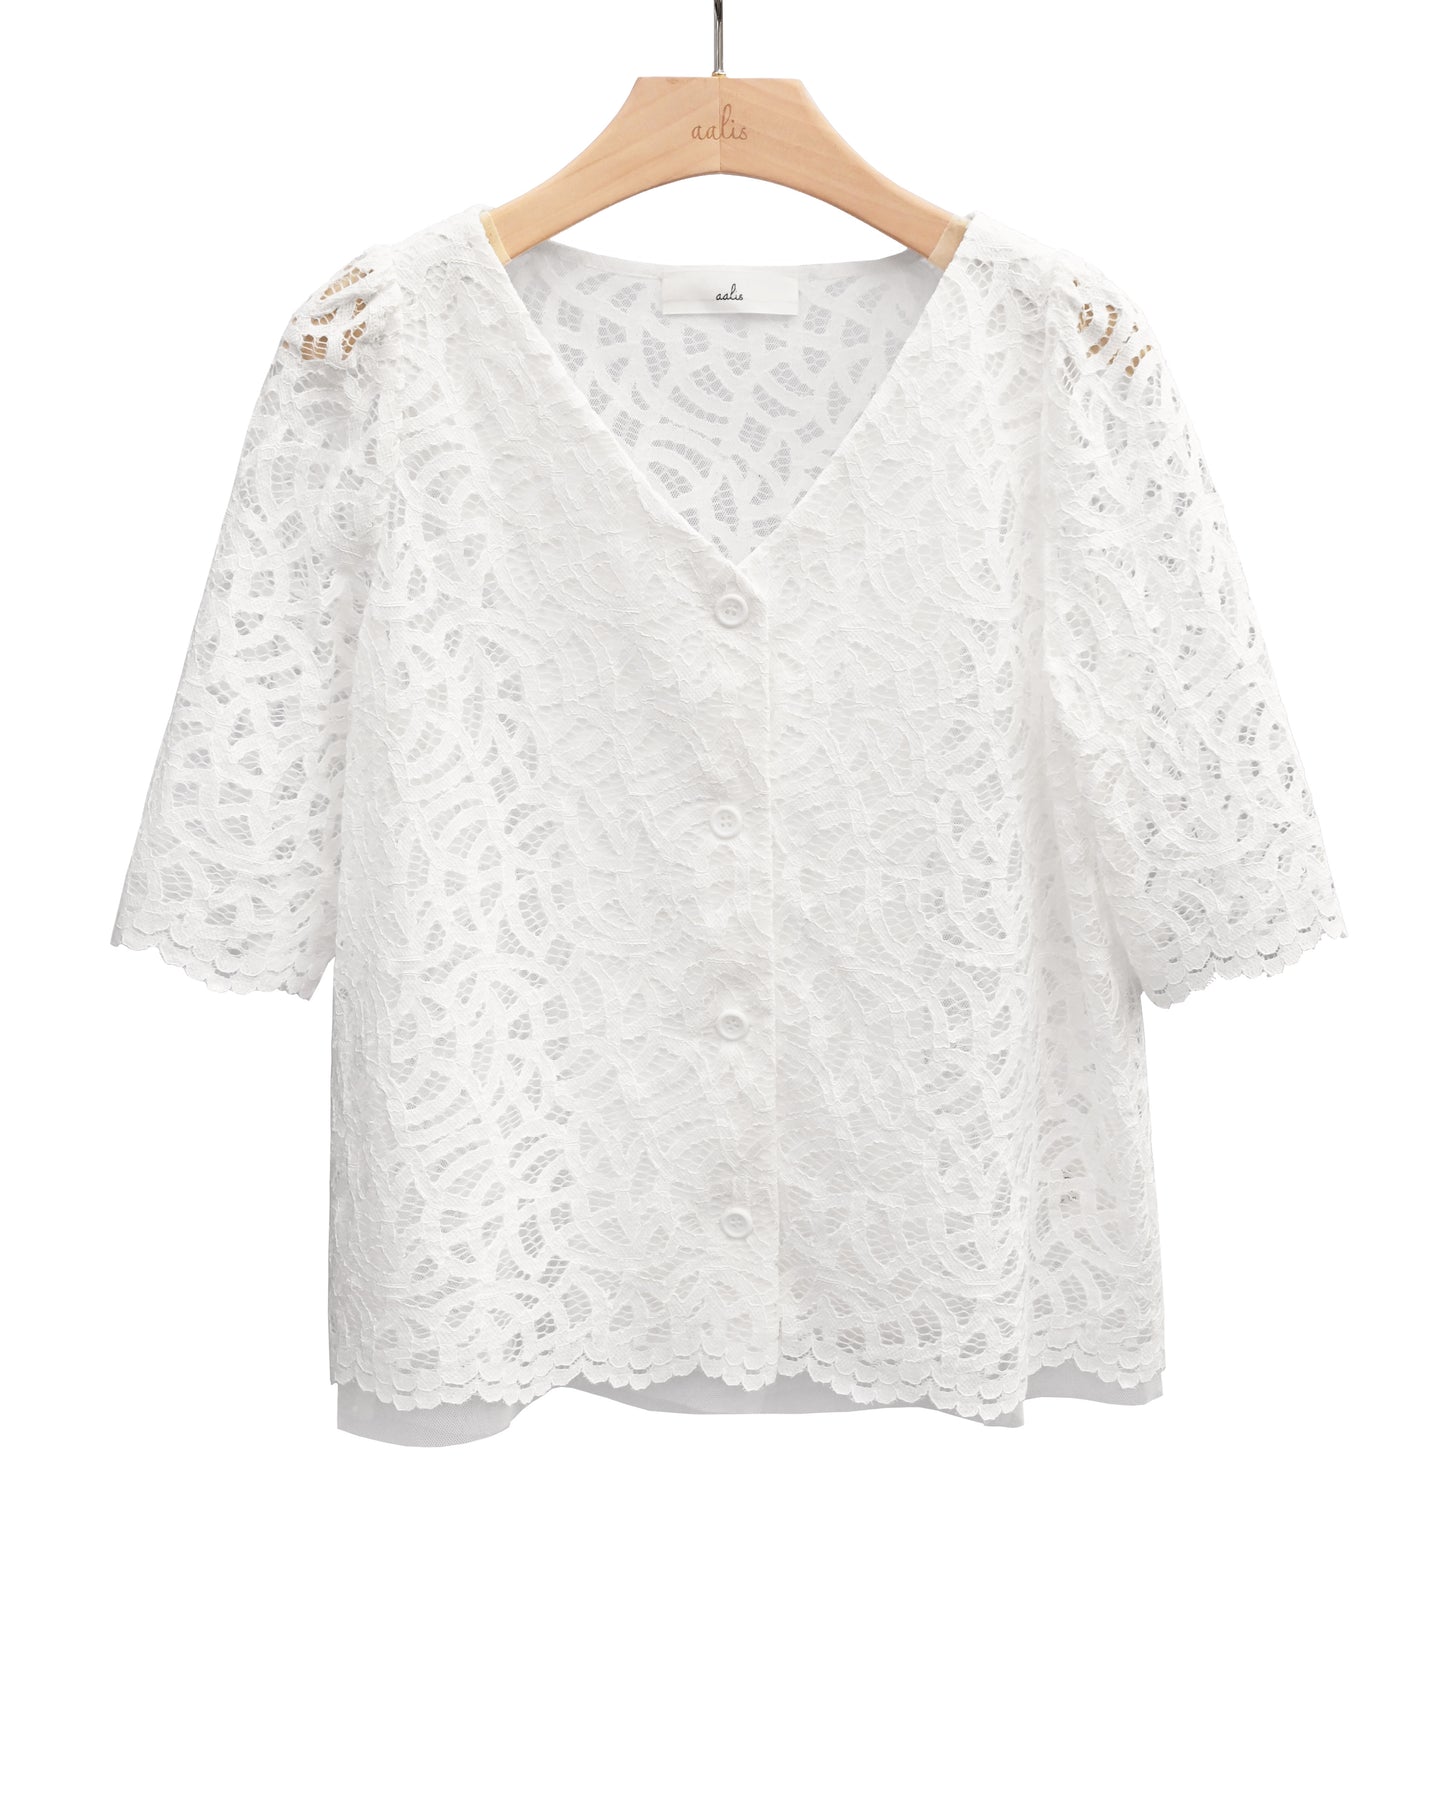 aalis ROSELYN Lace Cardigan (White)